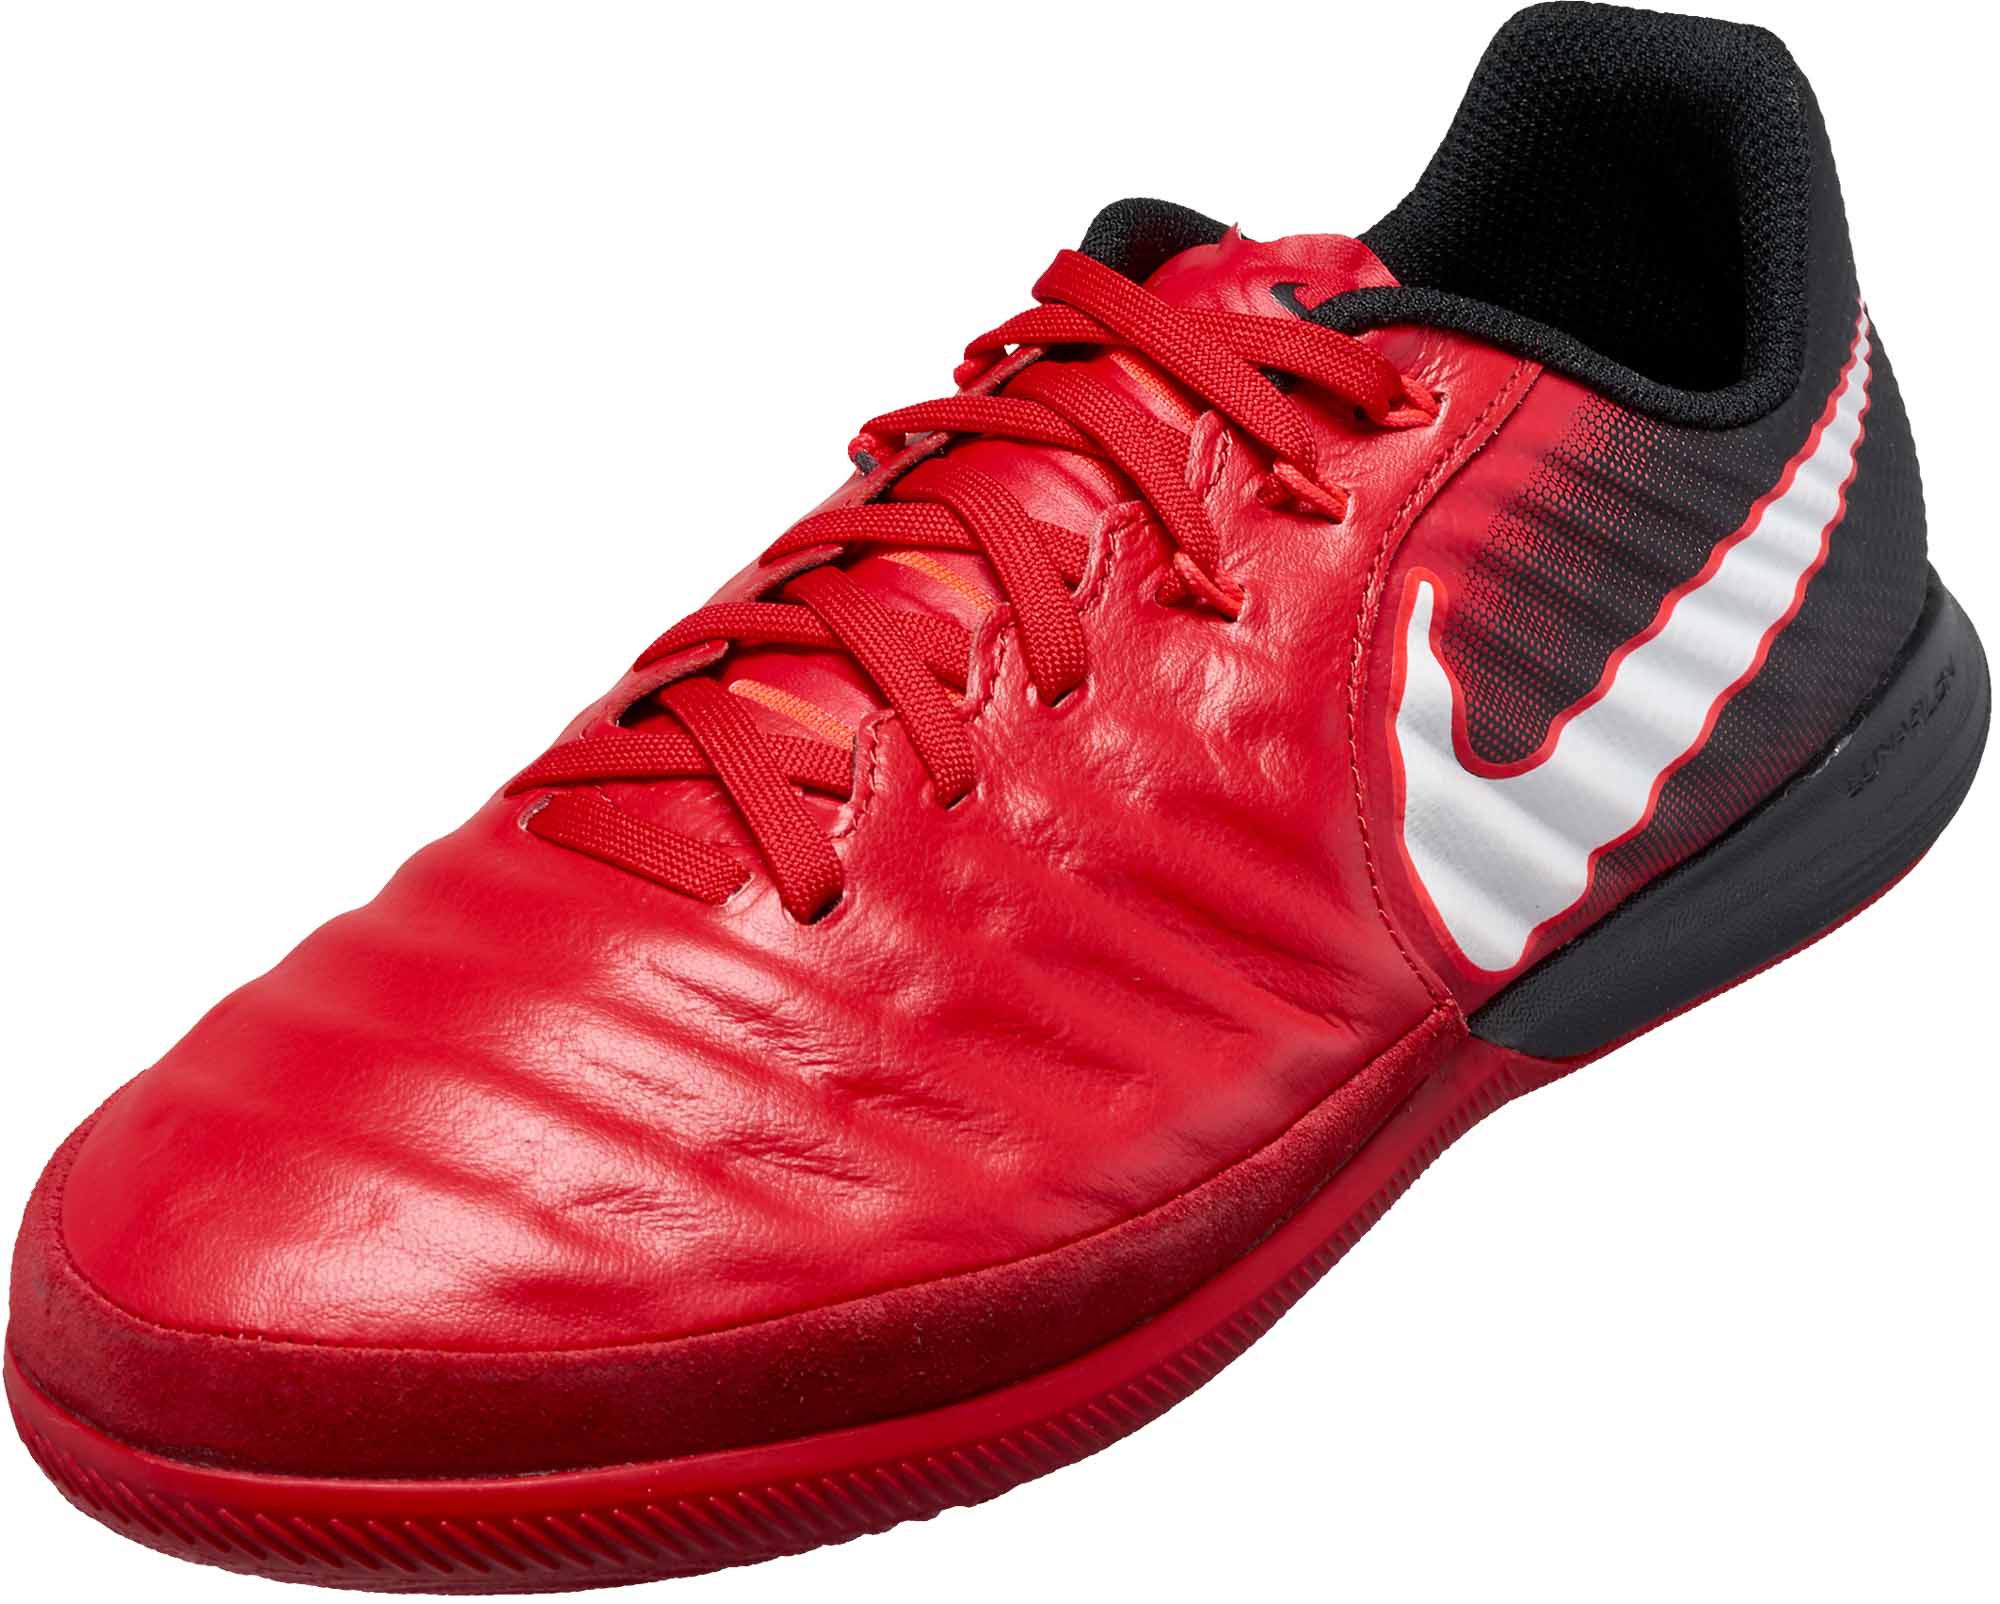 Actual whisky Abuelos visitantes Nike Kids TiempoX Proximo II IC – Youth Indoor Proximos